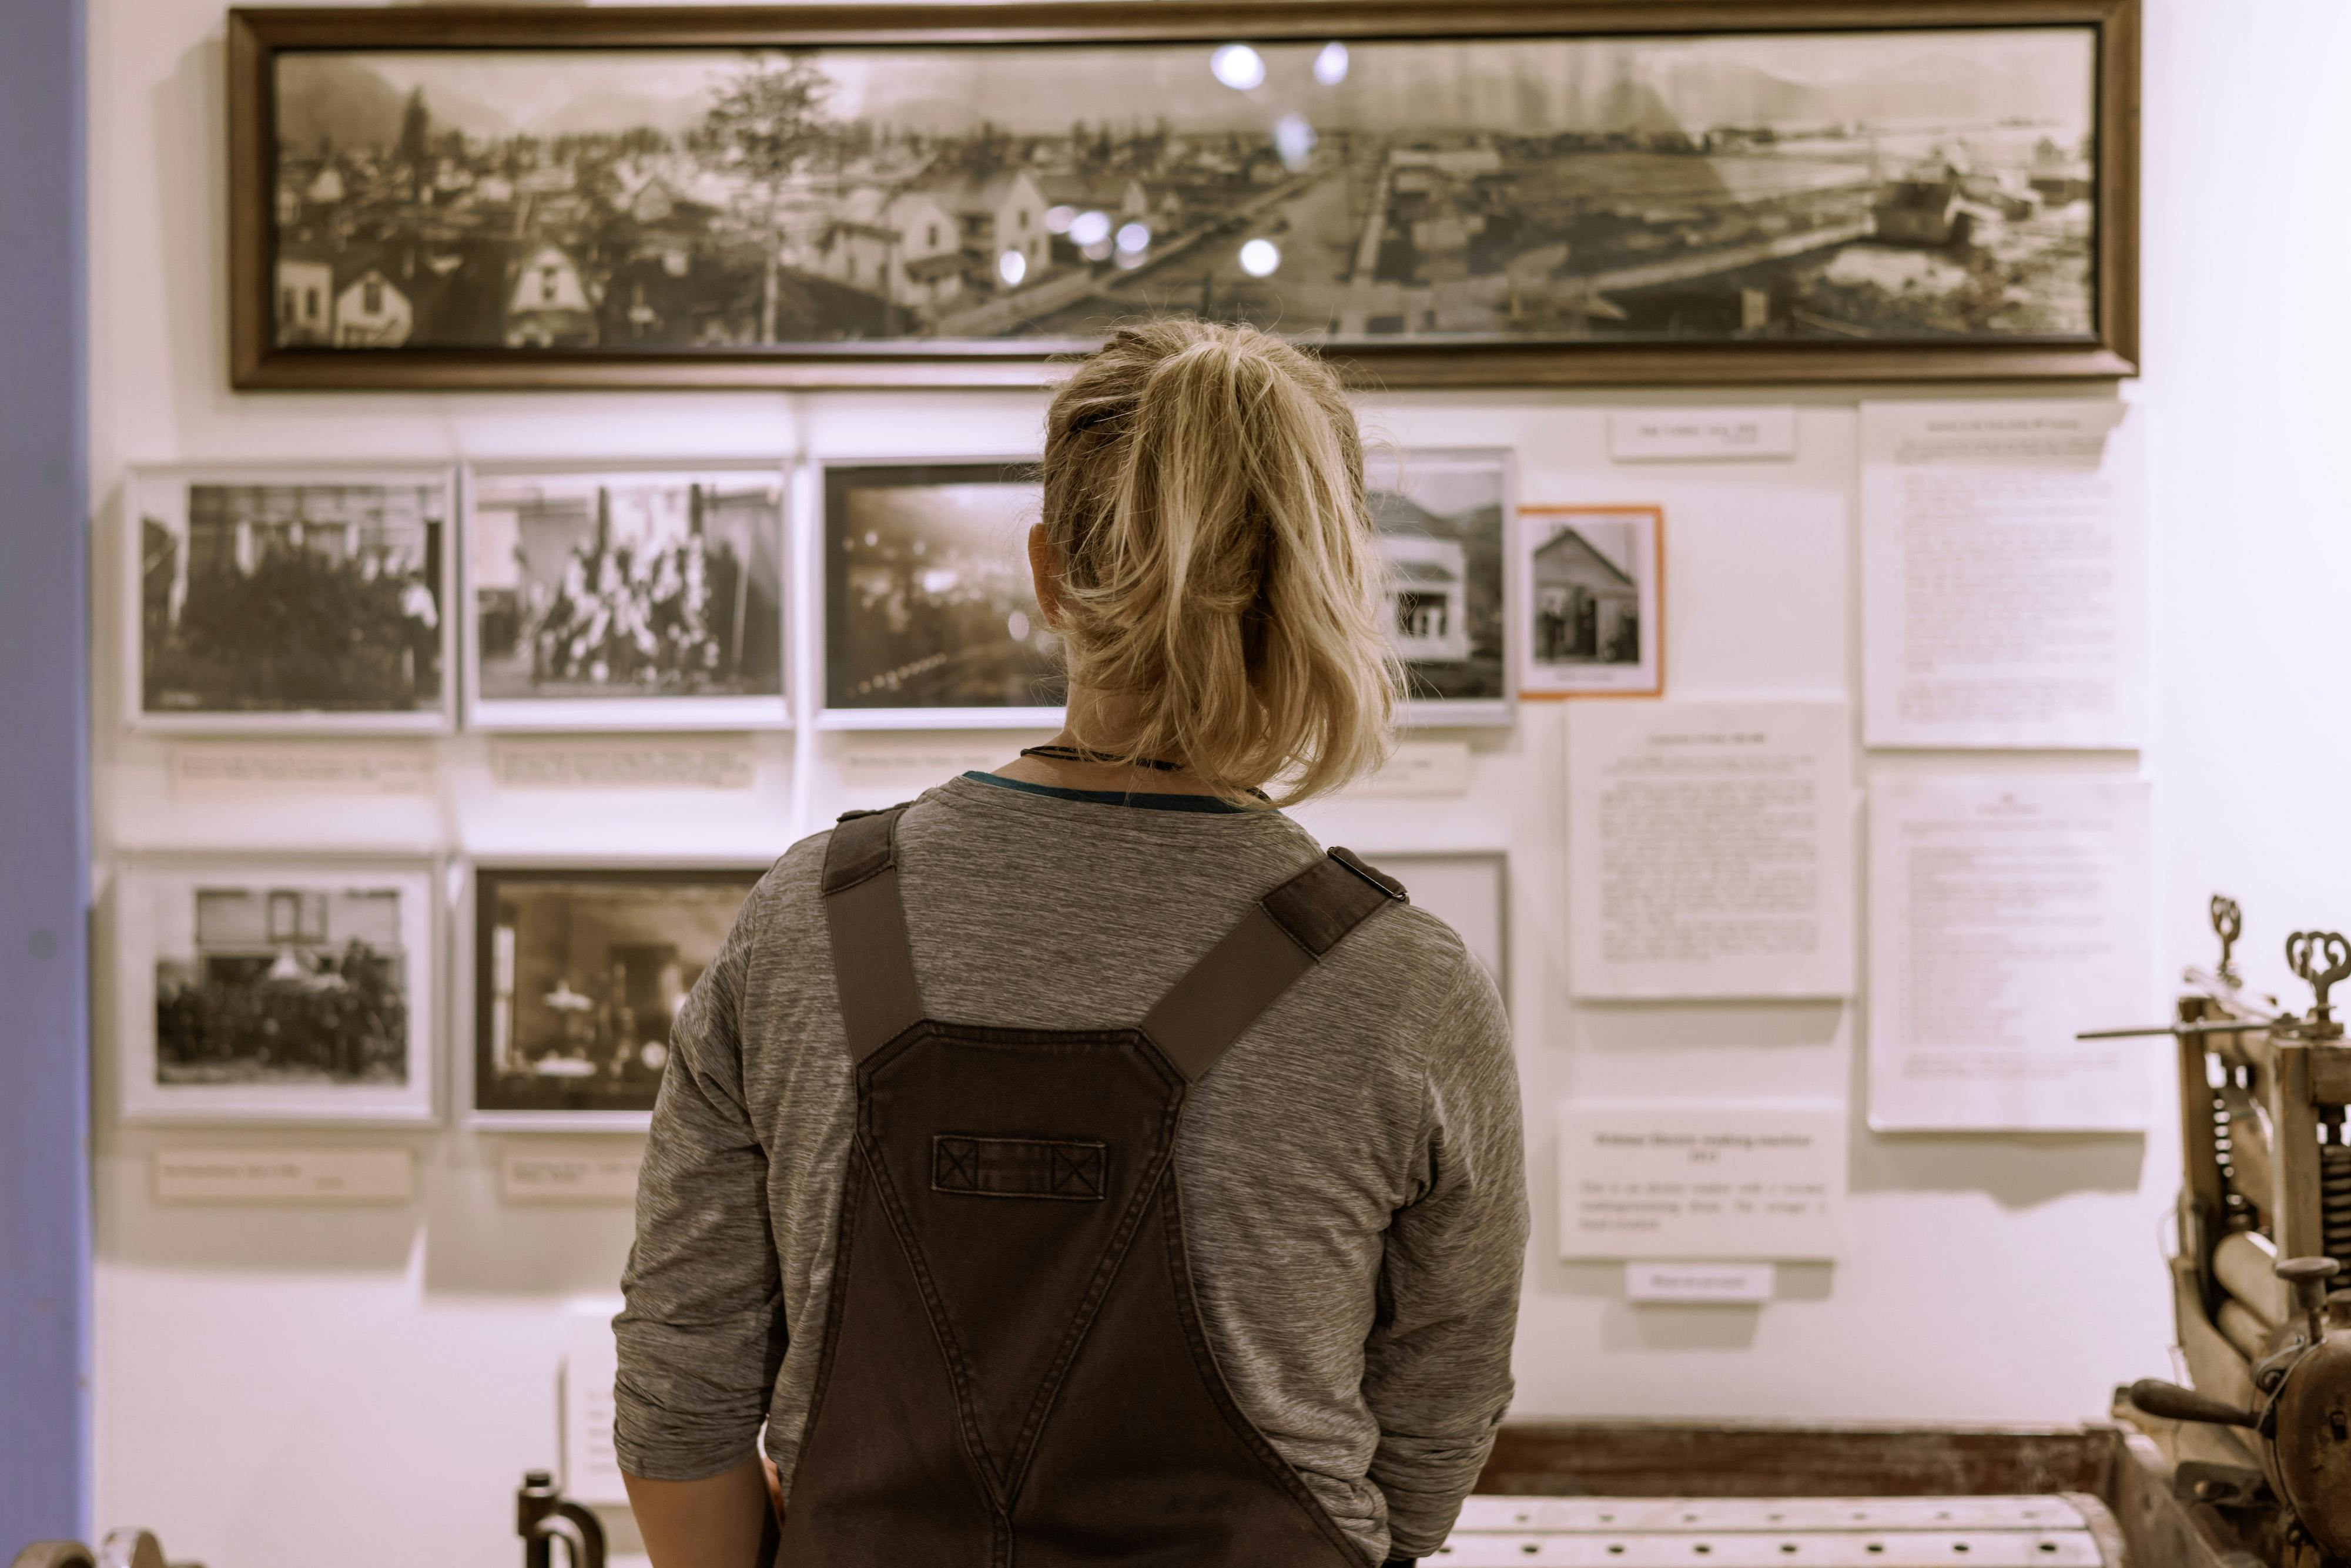 Karen Blue's daughter learning about Alaska's history at a museum 